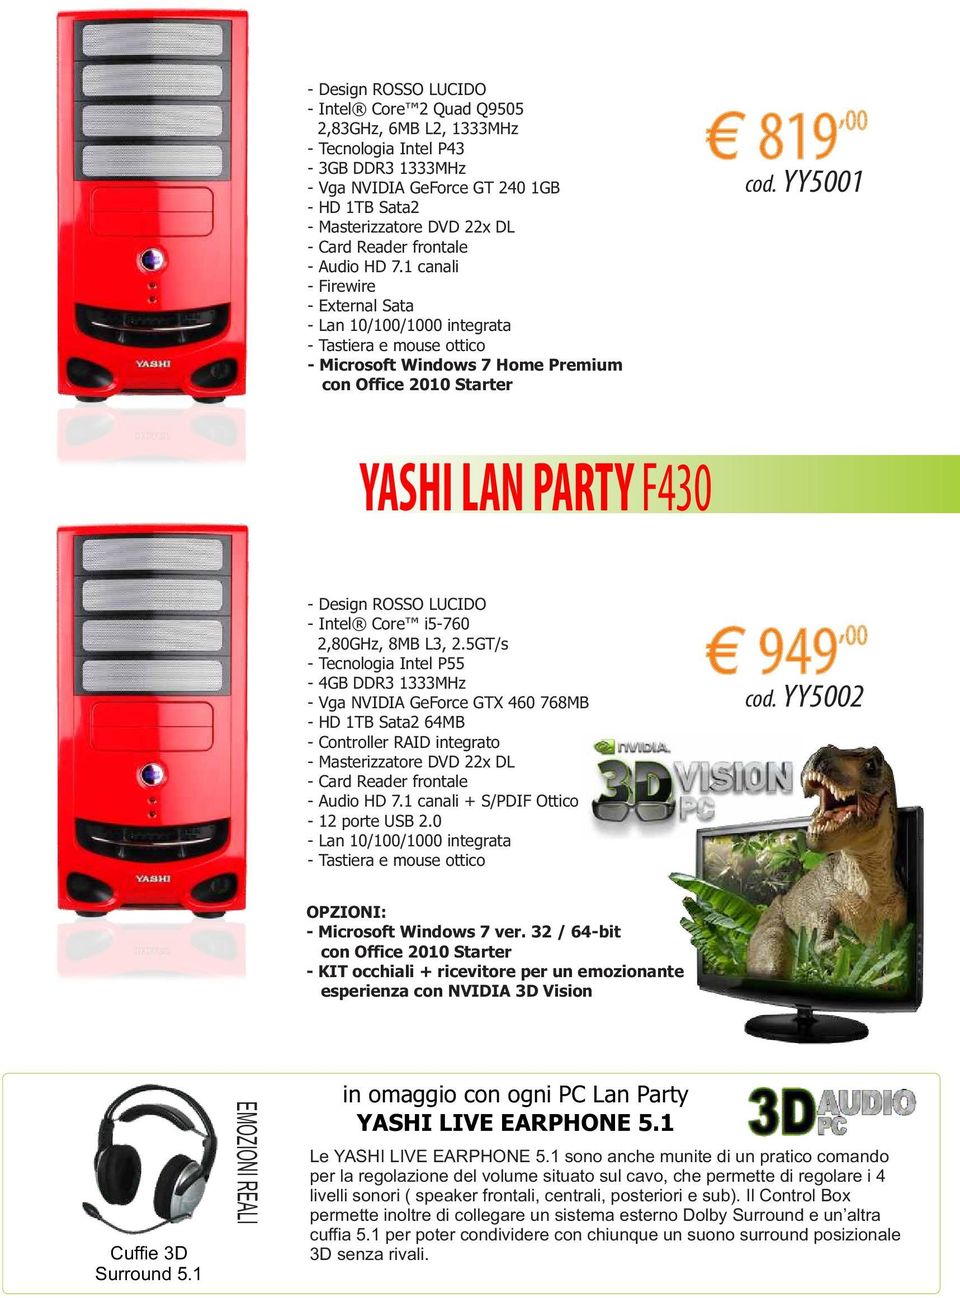 YY5001 YASHI LAN PARTY F430 - Design ROSSO LUCIDO - Intel Core i5-760 2,80GHz, 8MB L3, 2.